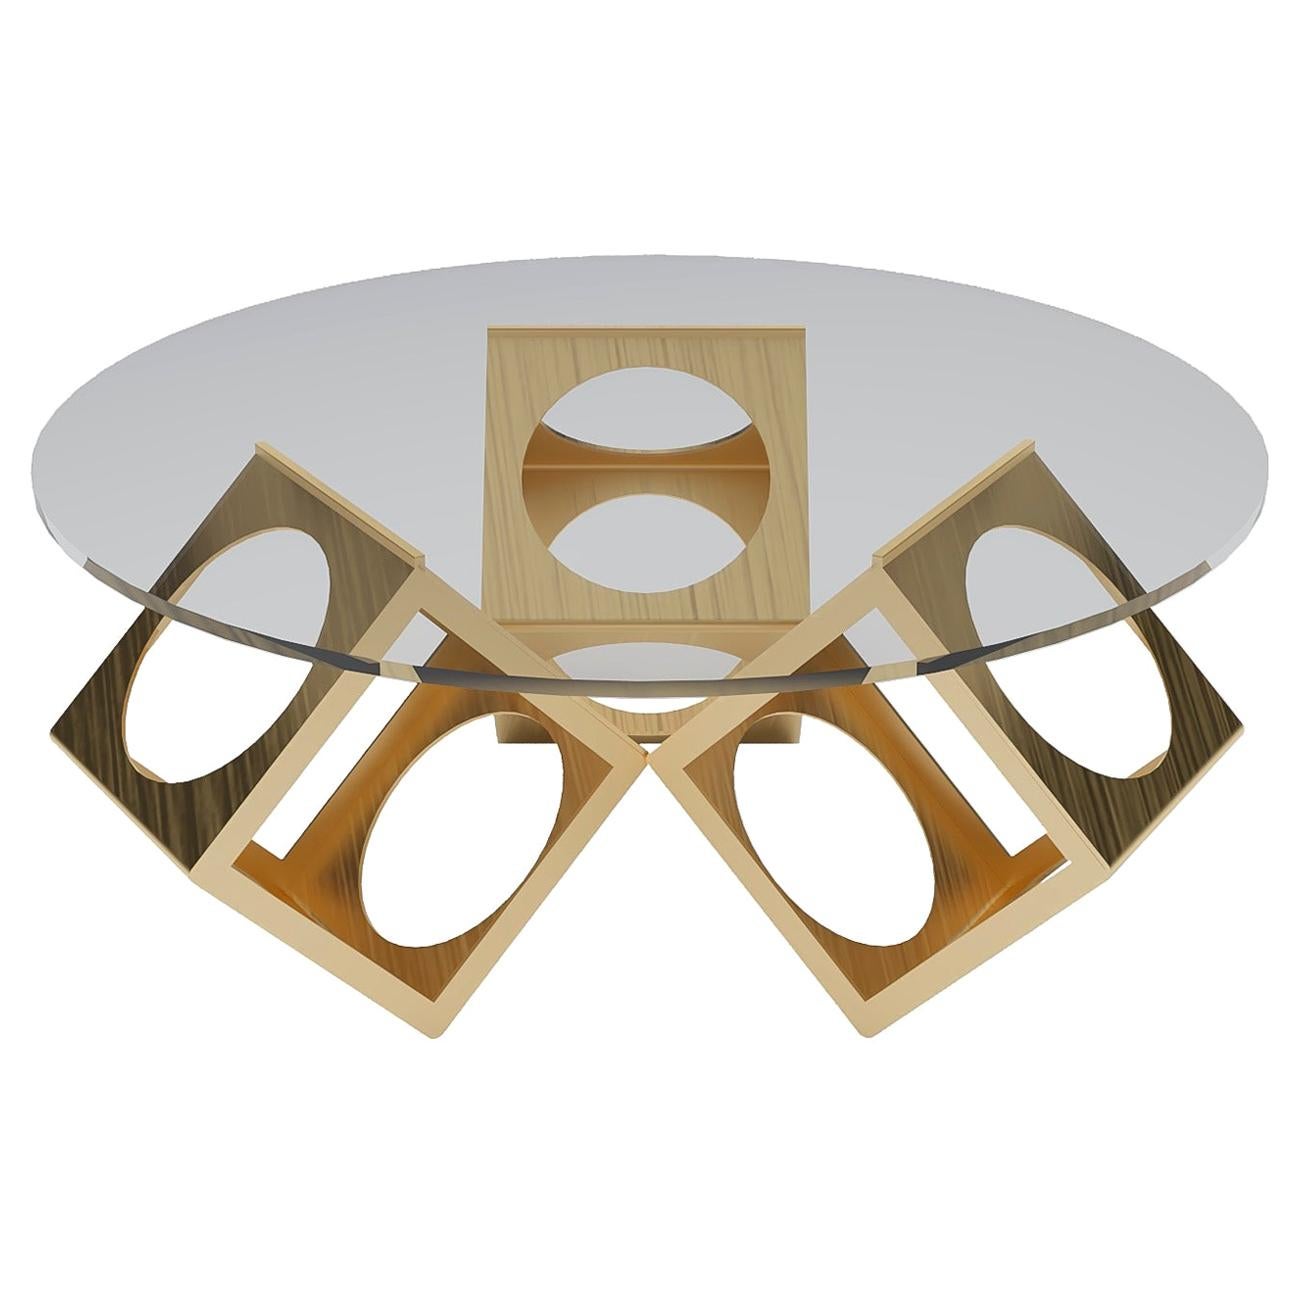 The Round Box Table Designed by Laurie Beckerman For Sale